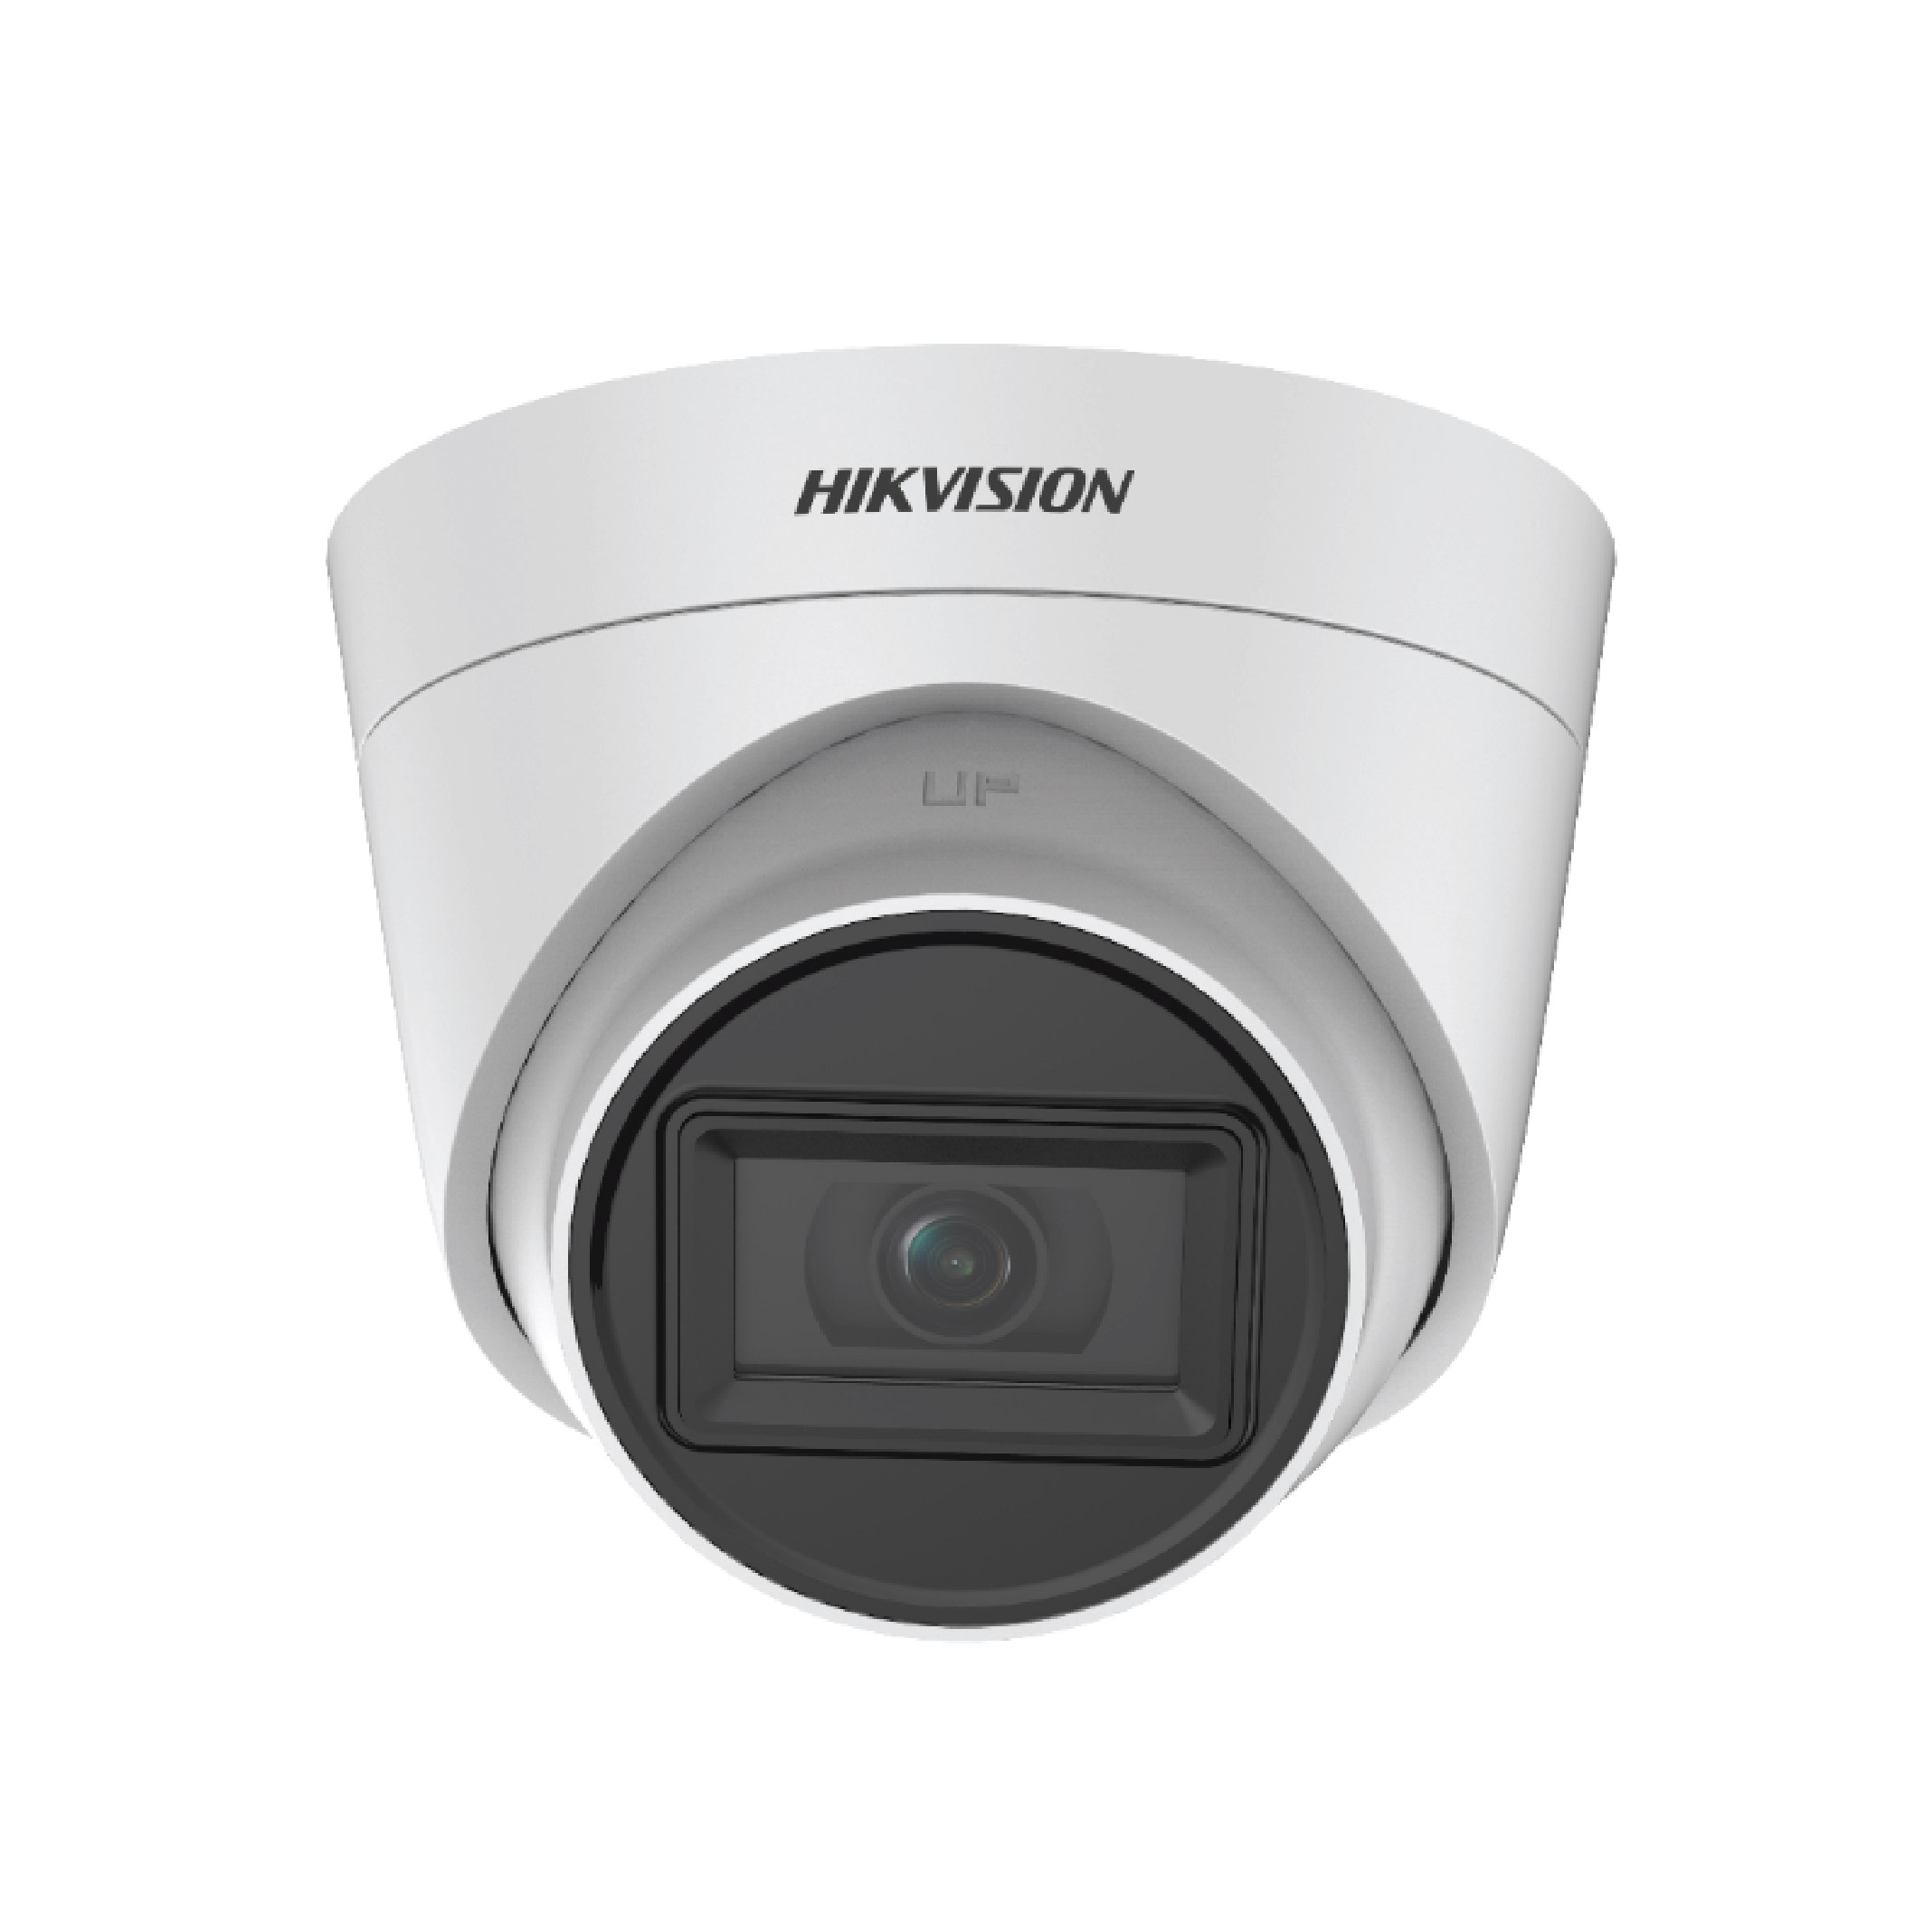 HIKVISION DS-2CE78H8T-IT3F Turbo HD Camera